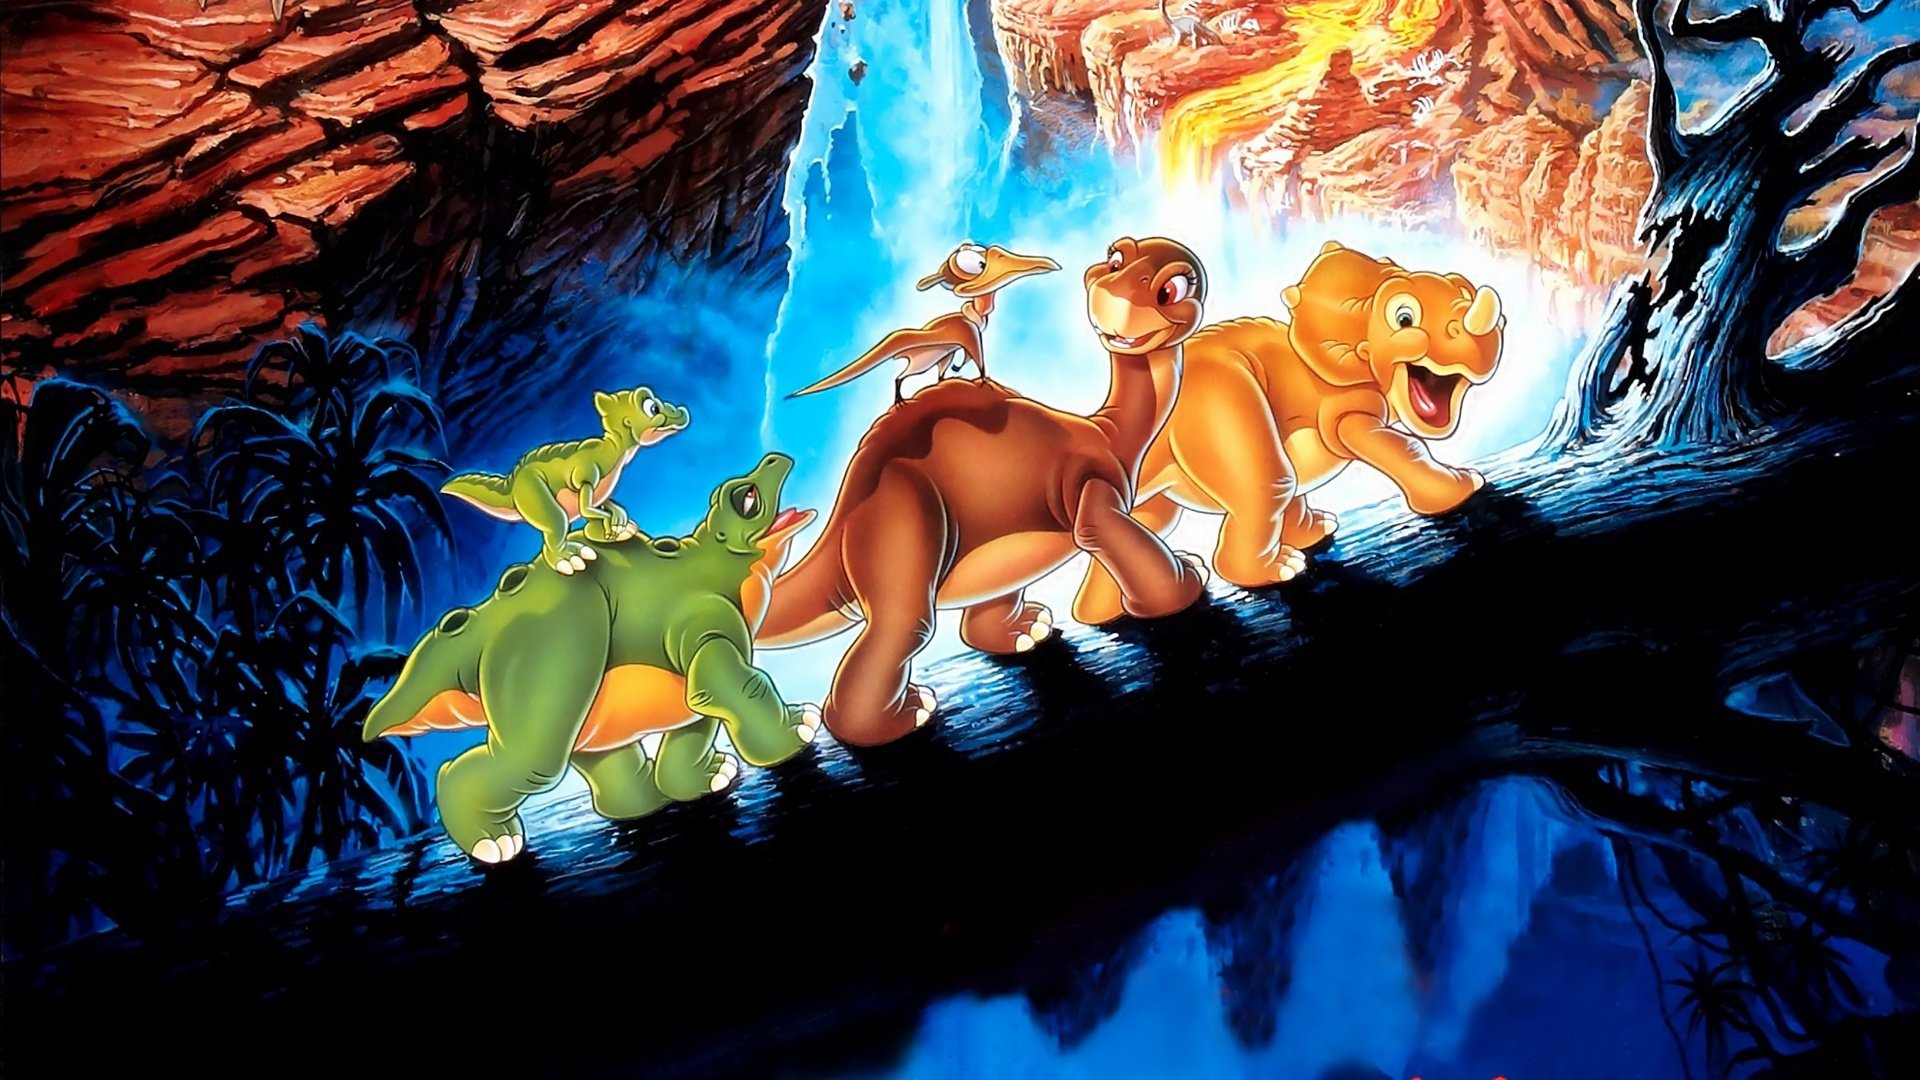 Oh Man, The Land Before Time Is Finally Available on Blu-ray